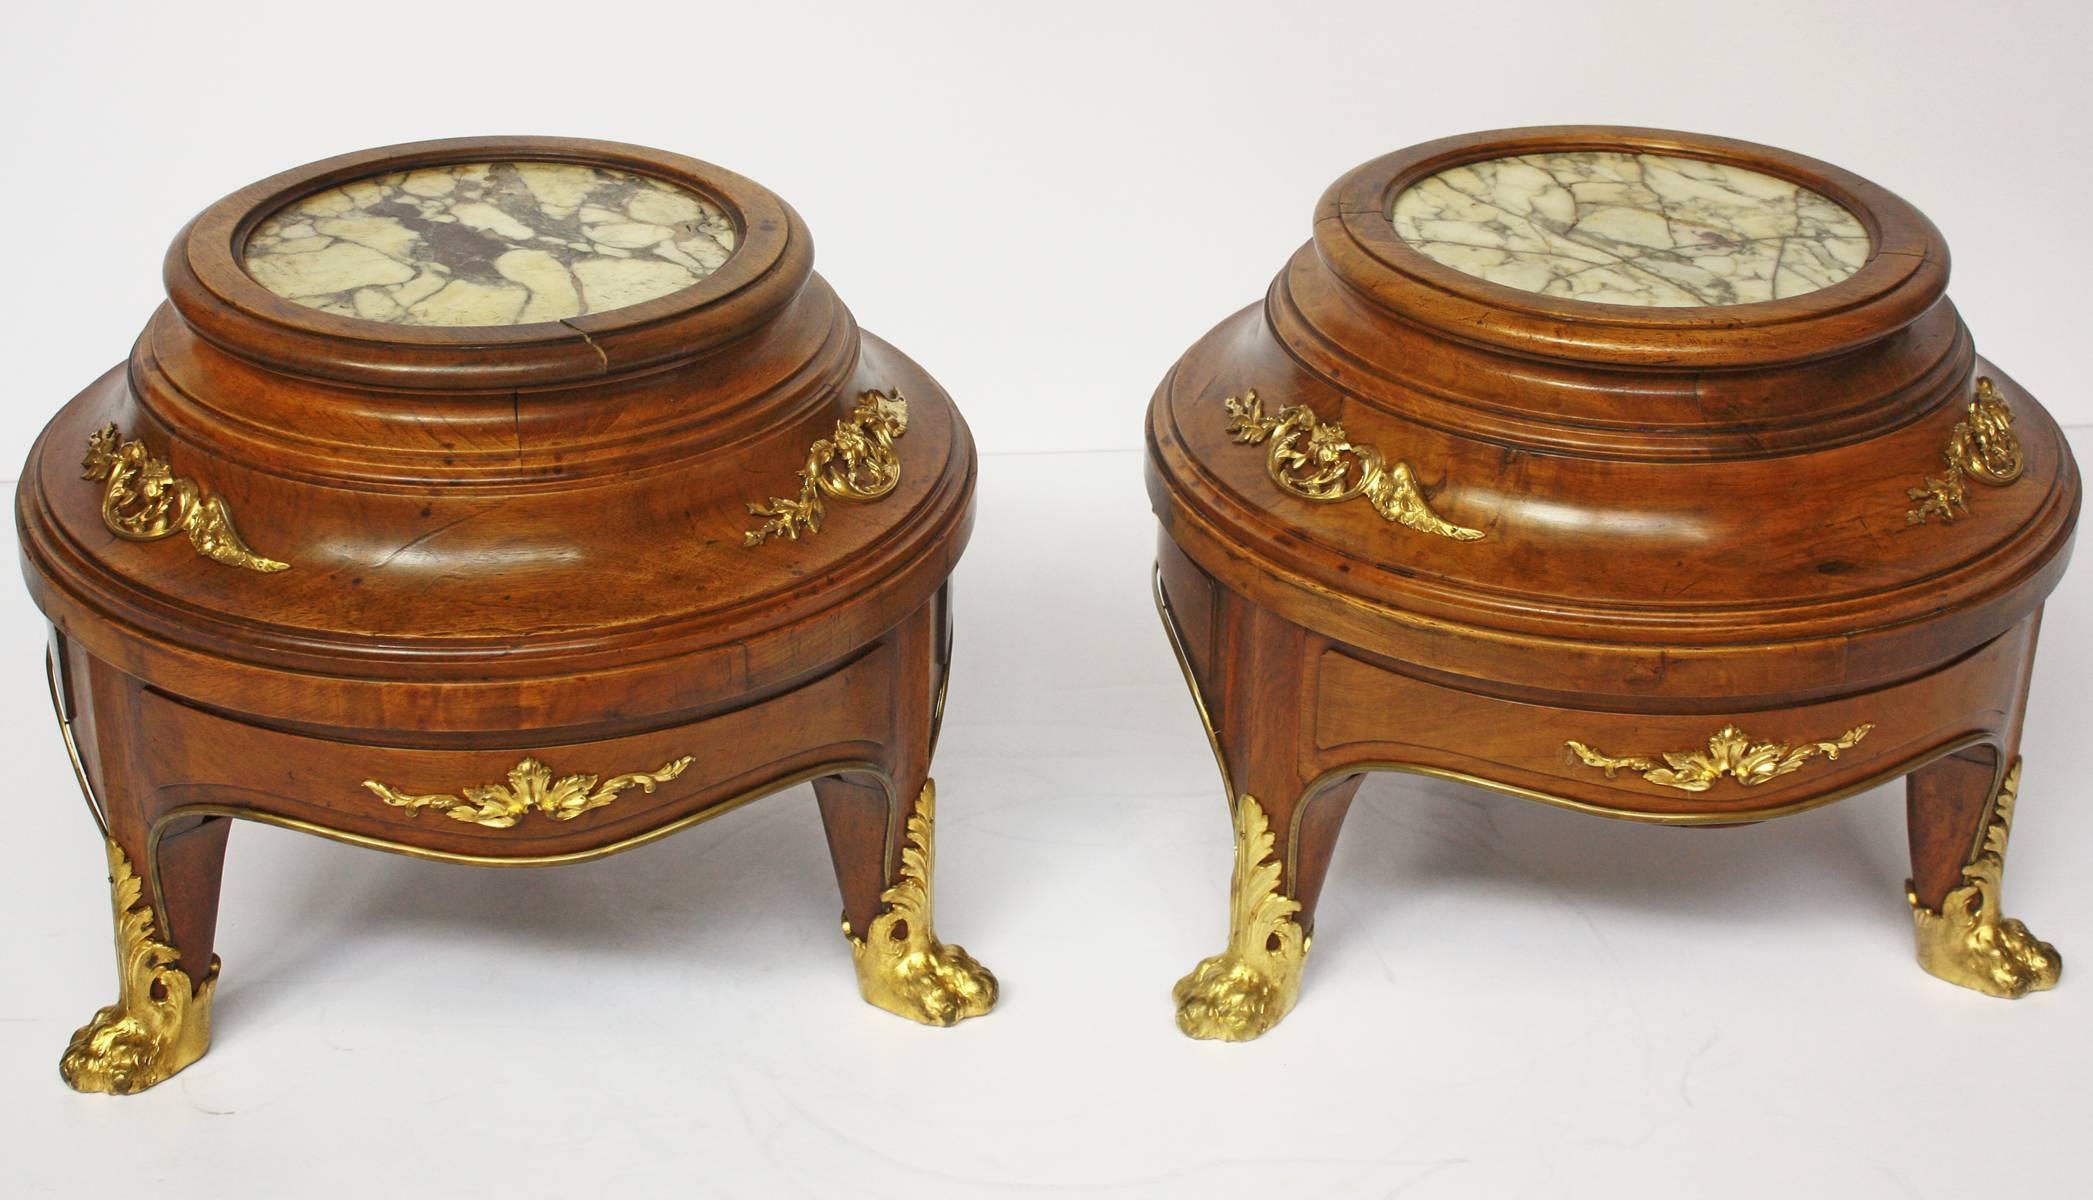 A pair of Louis XV style jardiniere or fish bowl stands of walnut with ormolu or gilt bronze mounts and marble insets on four down swept legs with hairy paw sabots, France, second half of the 19th century.

Marble is 9